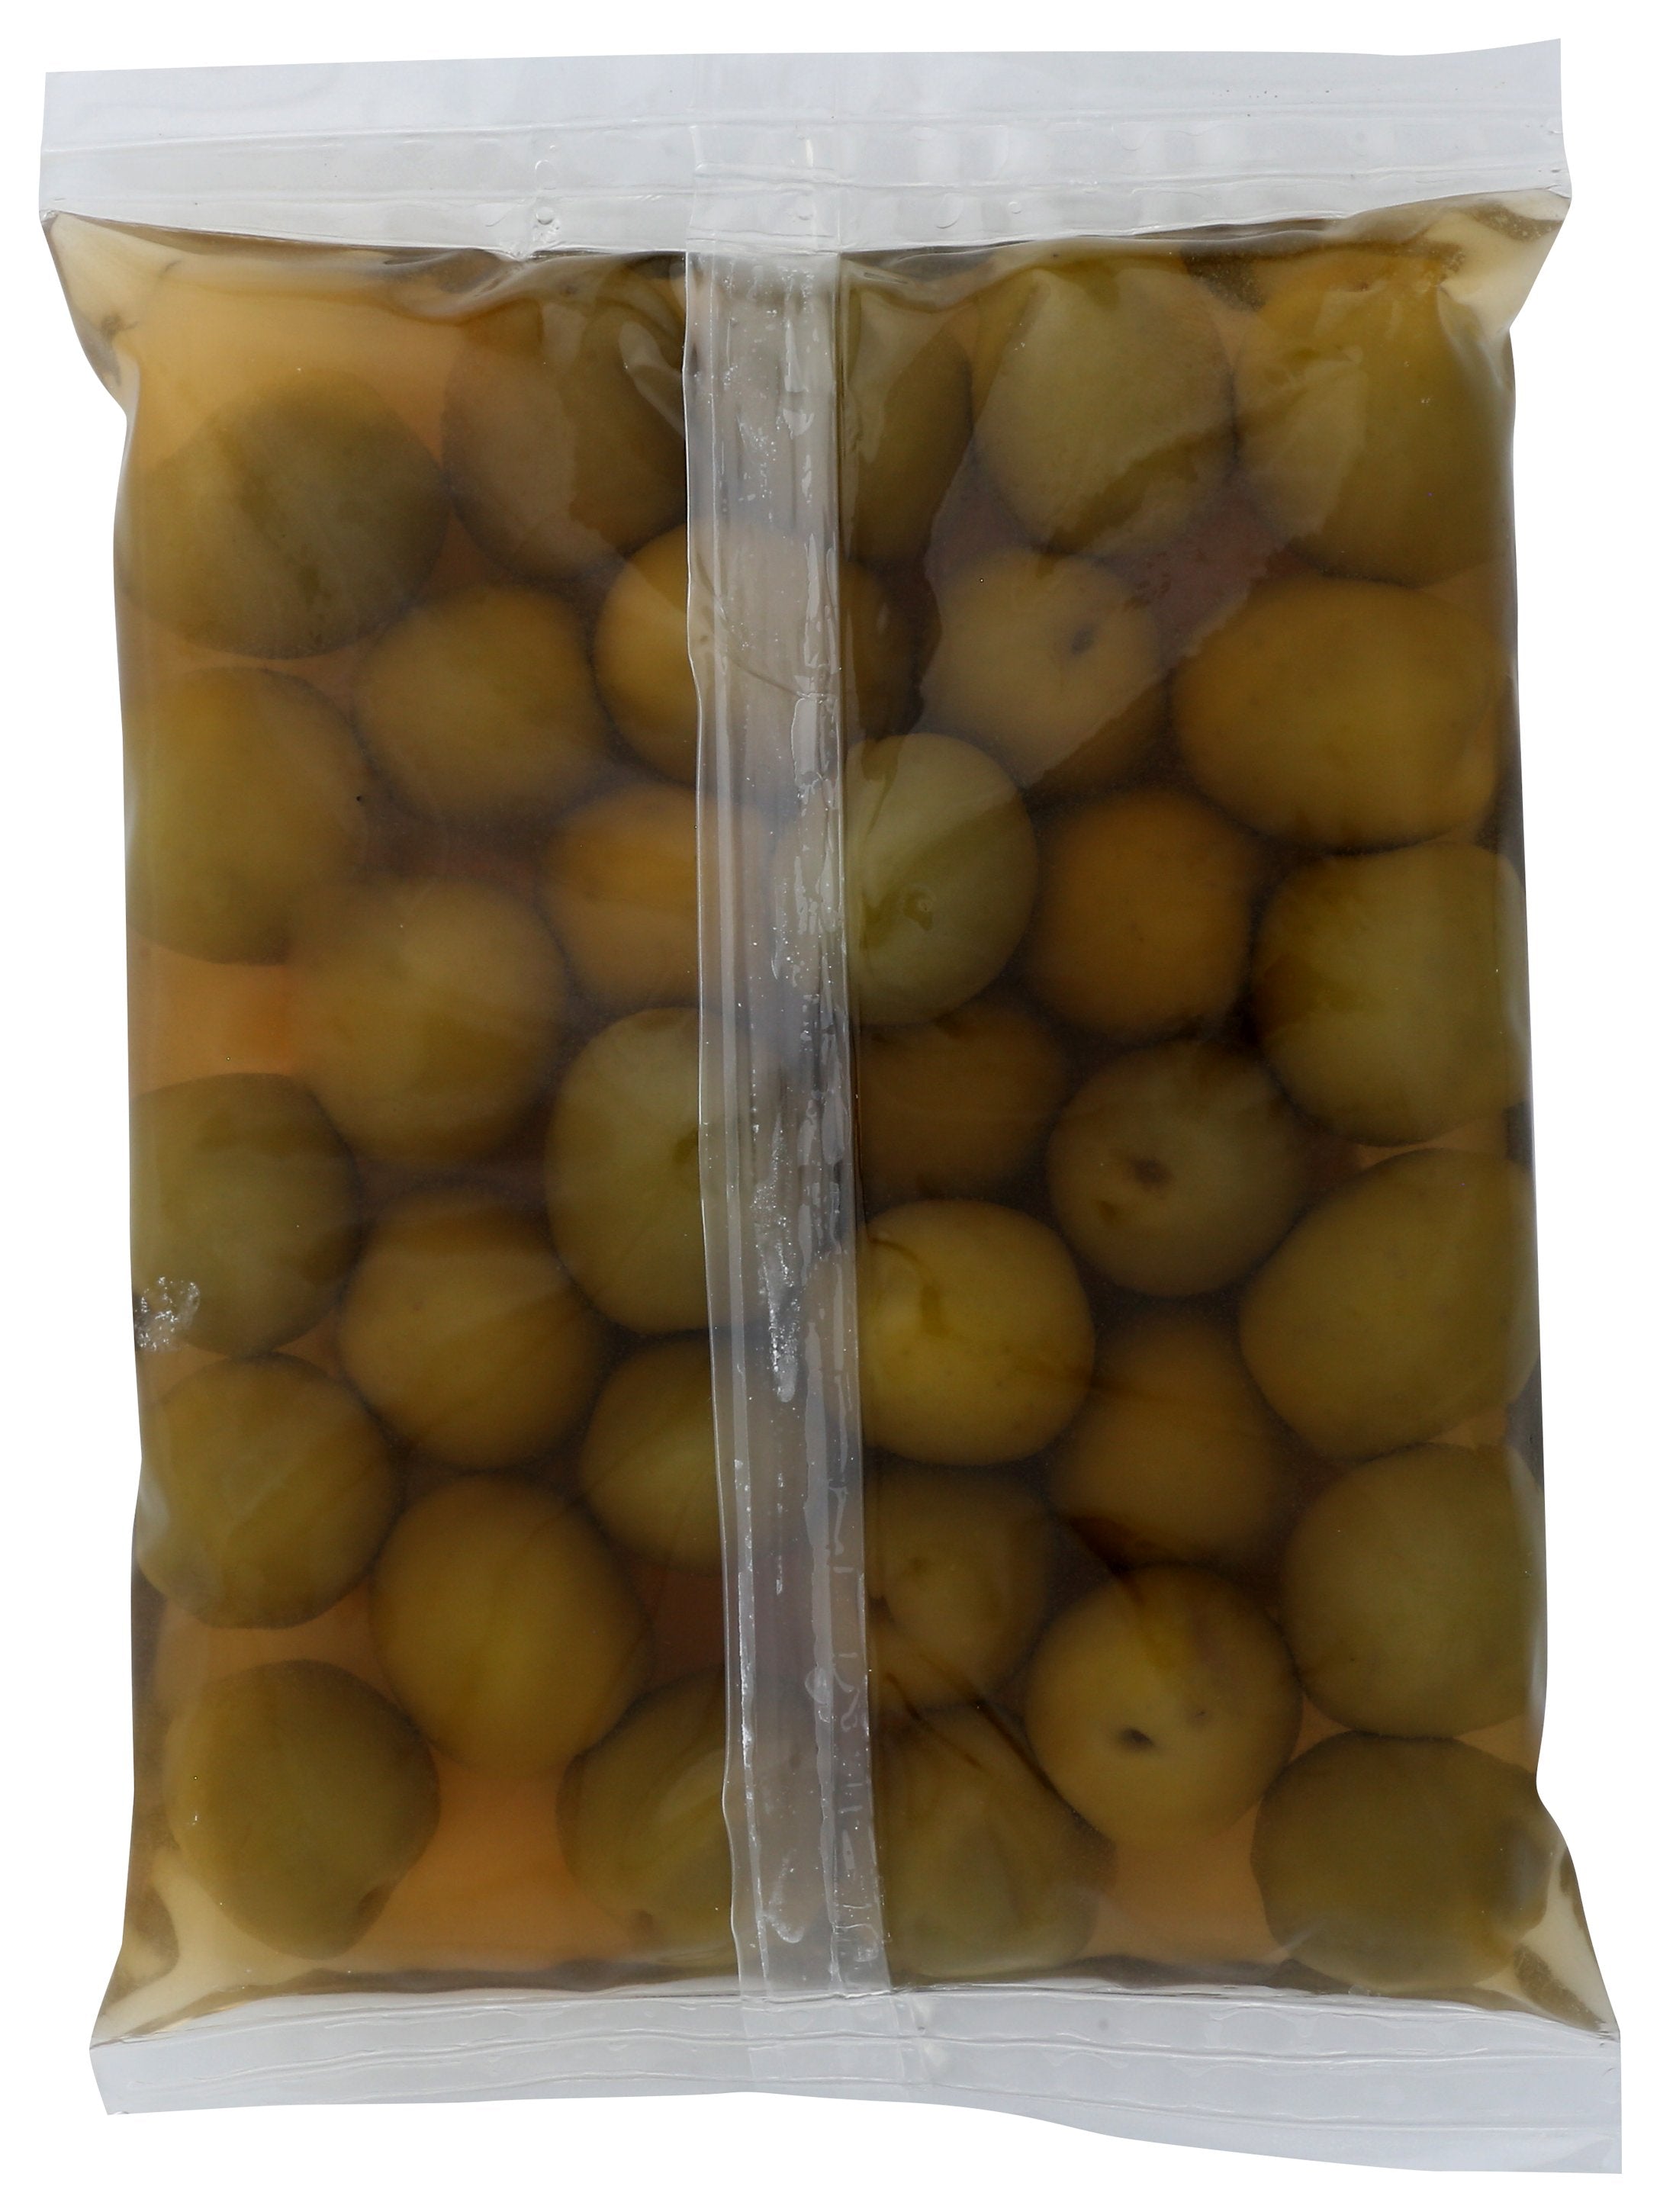 DIVINA POUCH OLIVES CASTLVTRANO - Case of 18